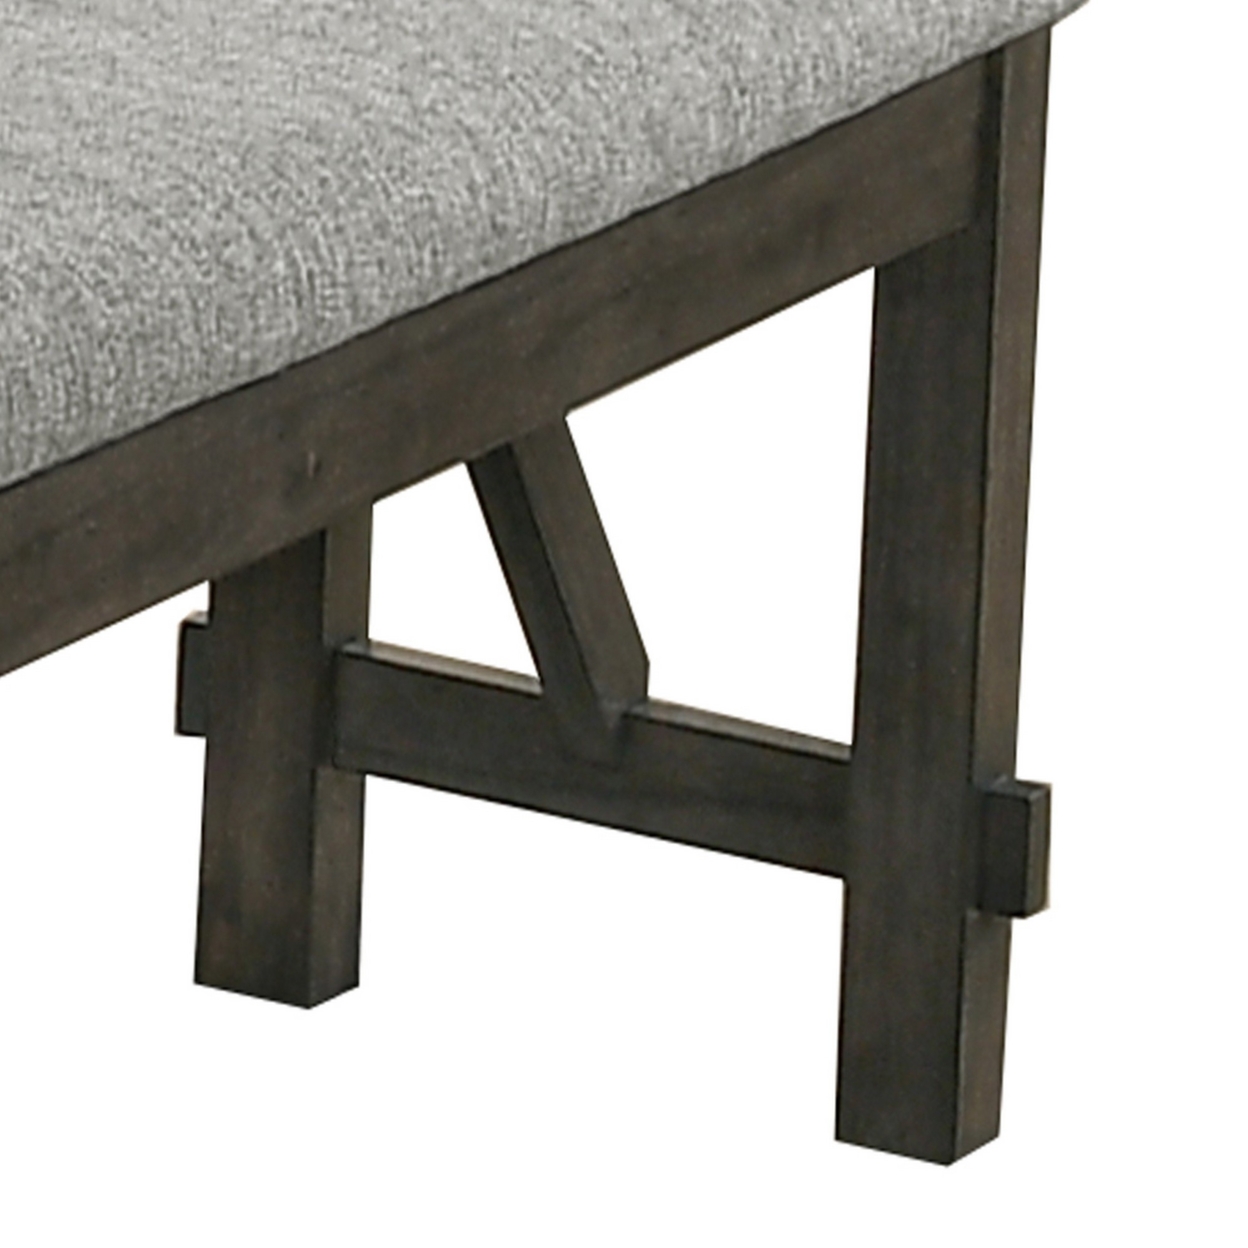 Fabric Upholstered Wooden Bench With Braces, Brown And Gray- Saltoro Sherpi